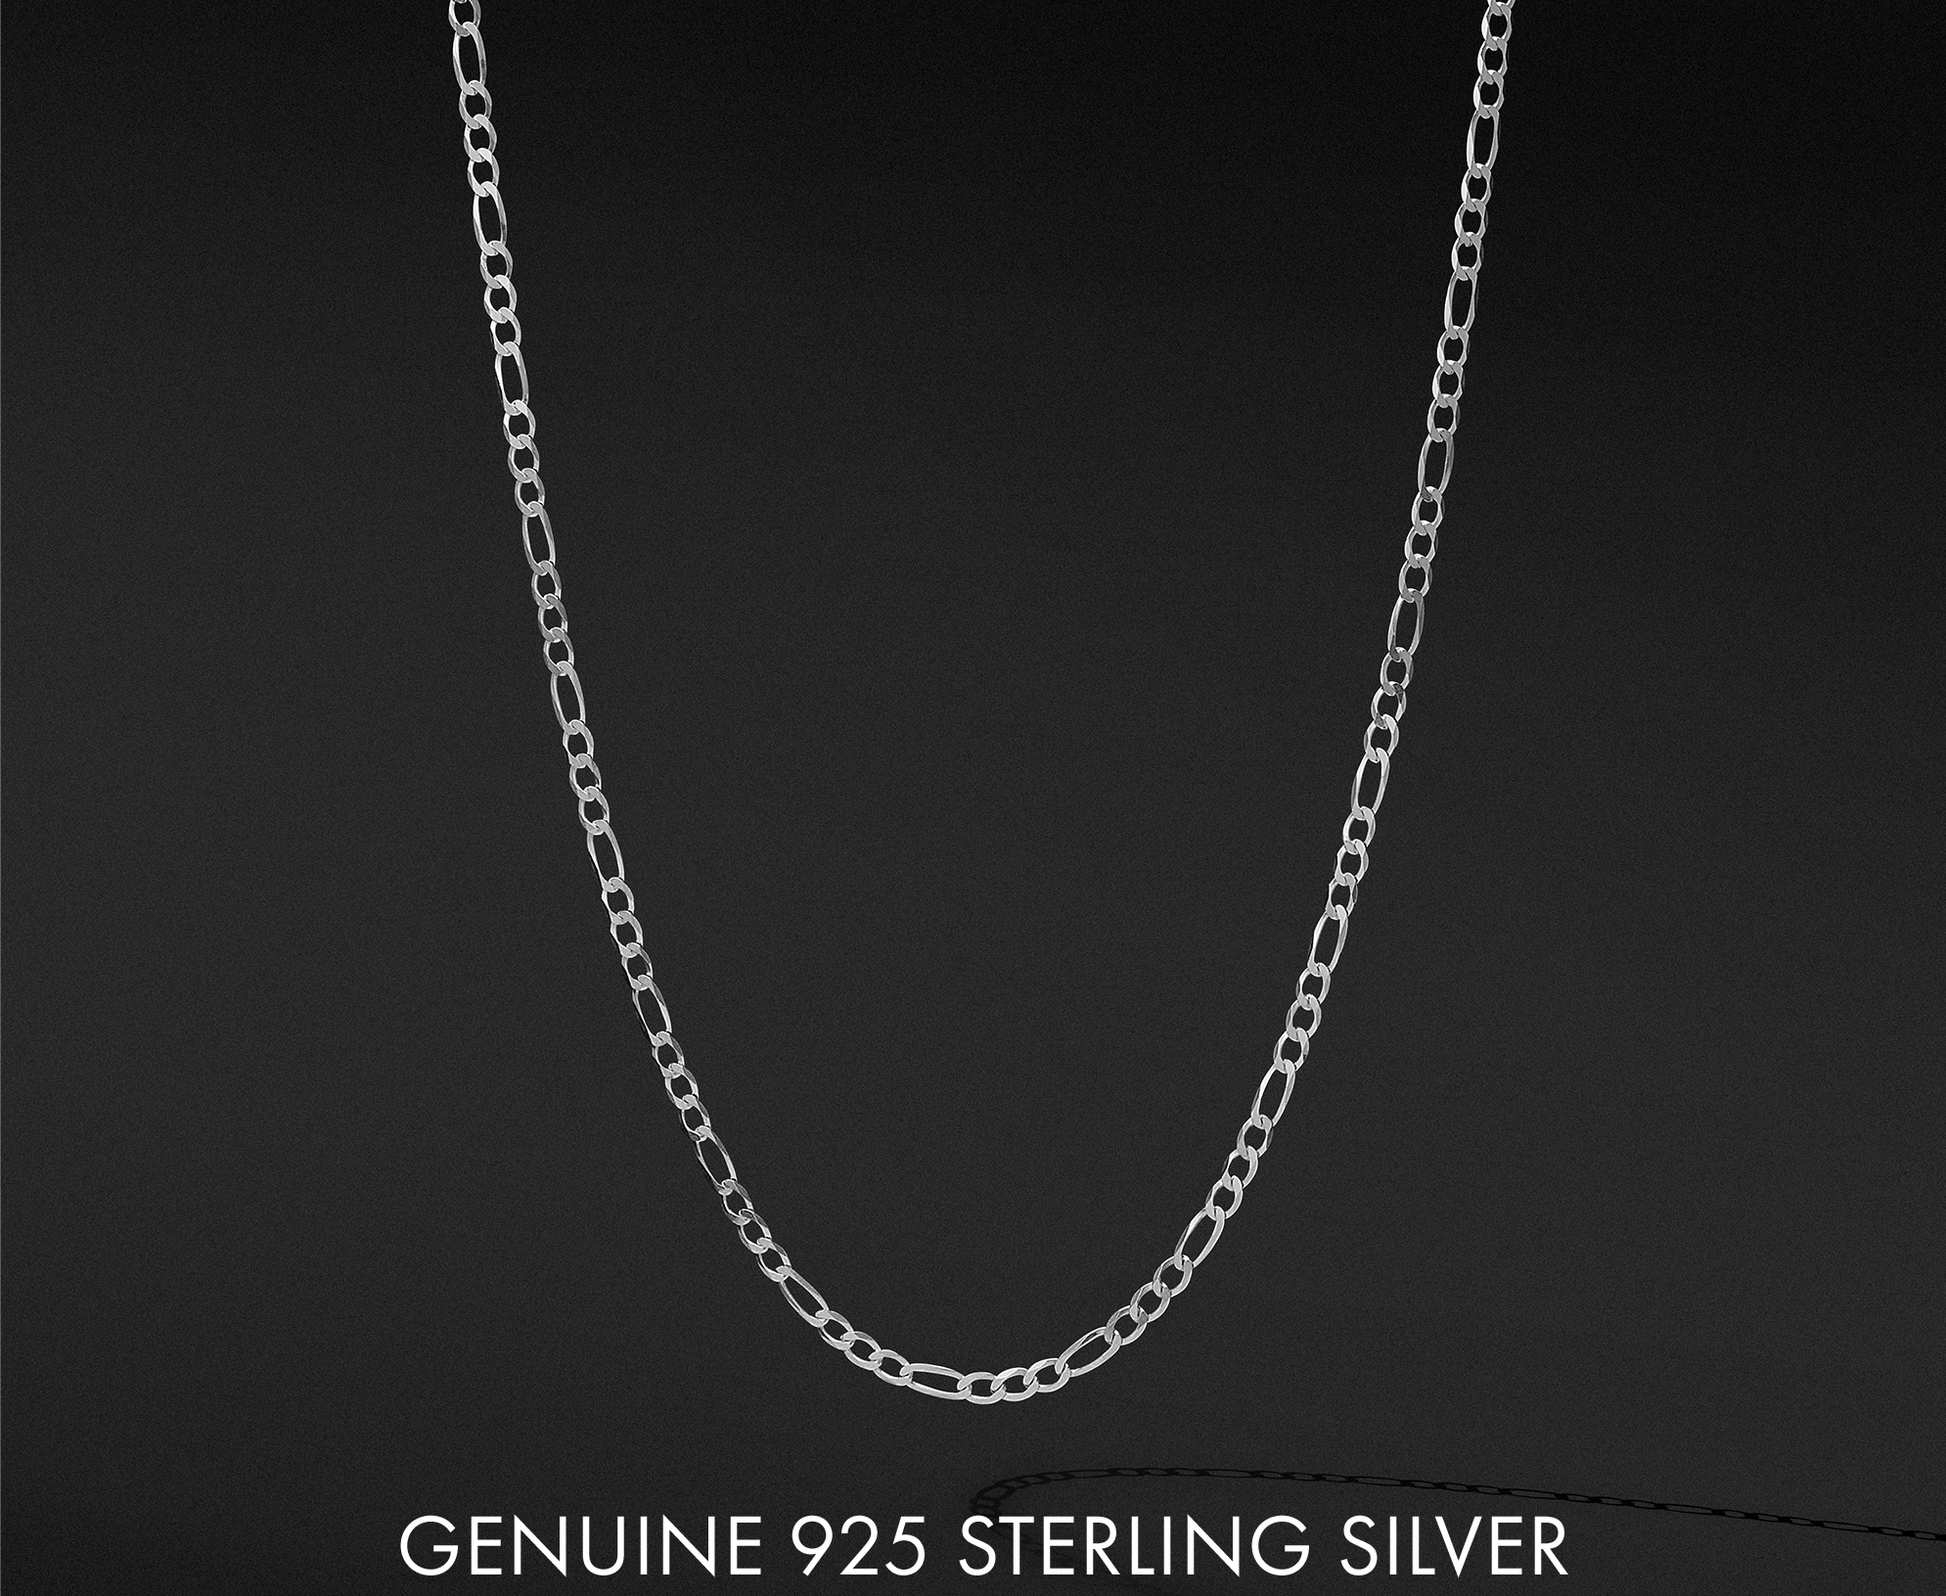 Solid 925 Sterling Silver 6MM Figaro Link Chain Necklaces